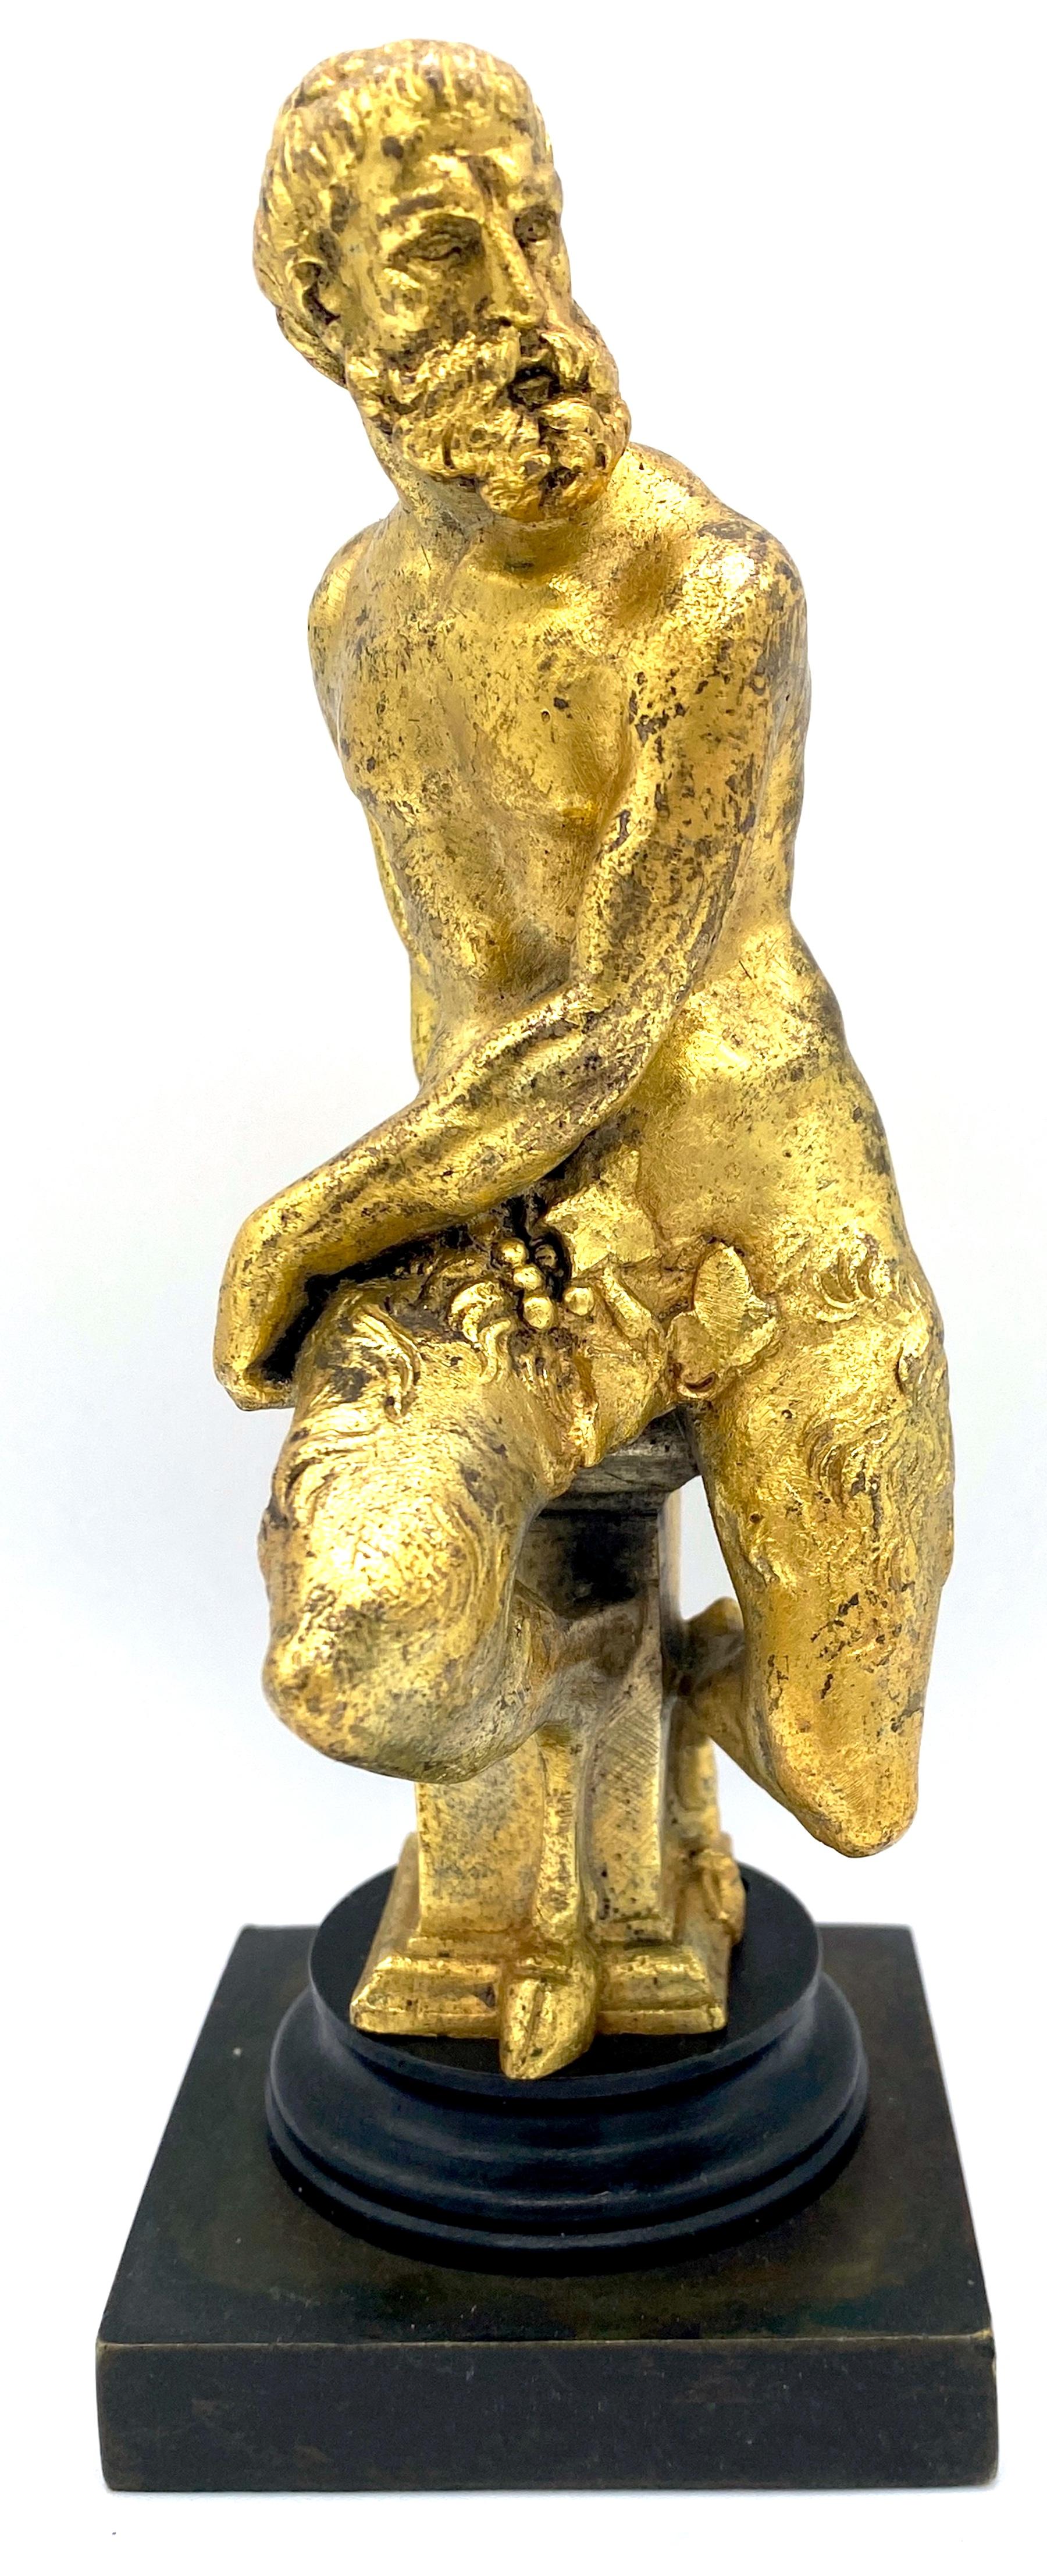 19th Century French Ormolu & Patinated Bronze Sculpture of a Seated Satyr 
France, Circa 1875

A good quality 19th Century French Ormolu & Patinated Bronze Sculpture of a Seated Satyr, made circa 1875. This well-cast and modeled ormolu sculpture